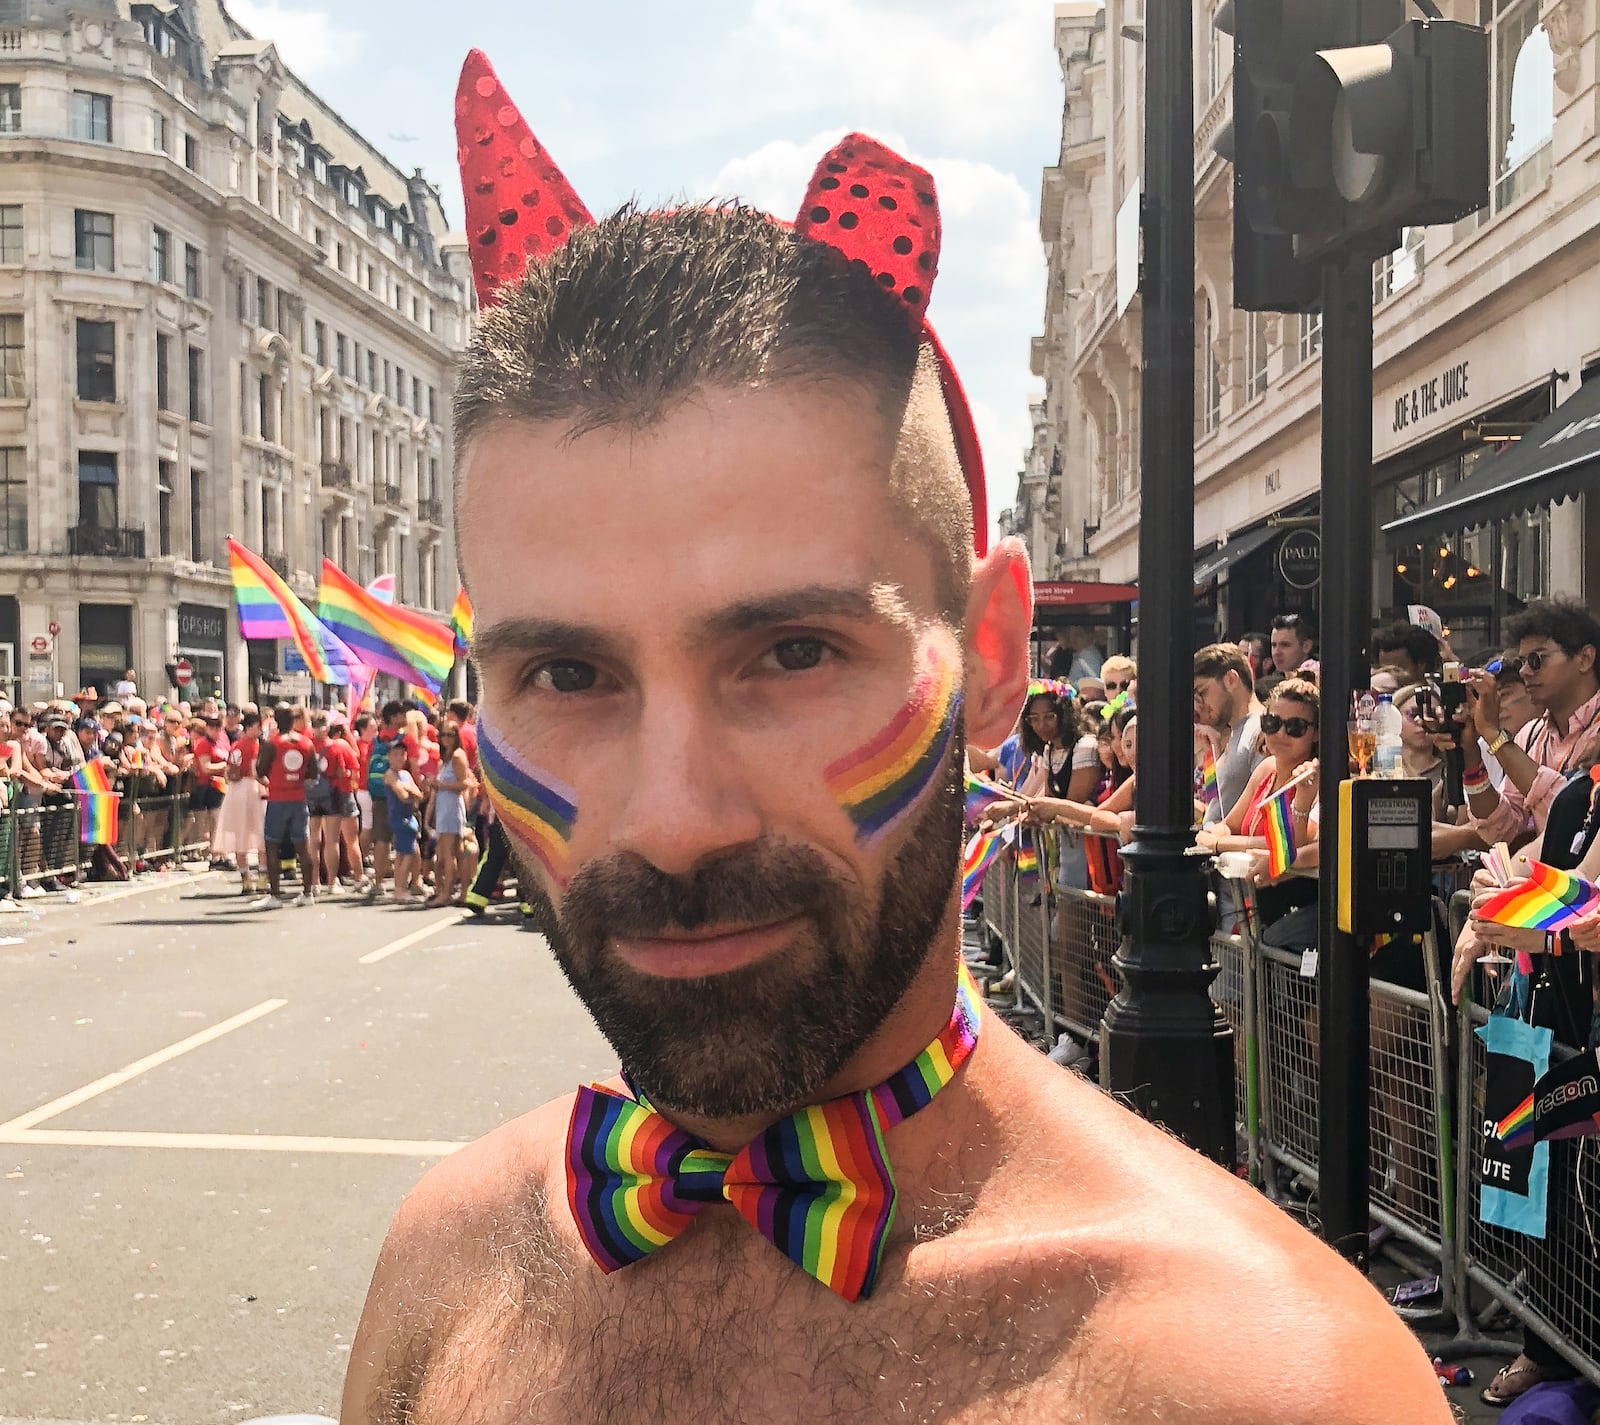 Cheeky devil outfit for Pride